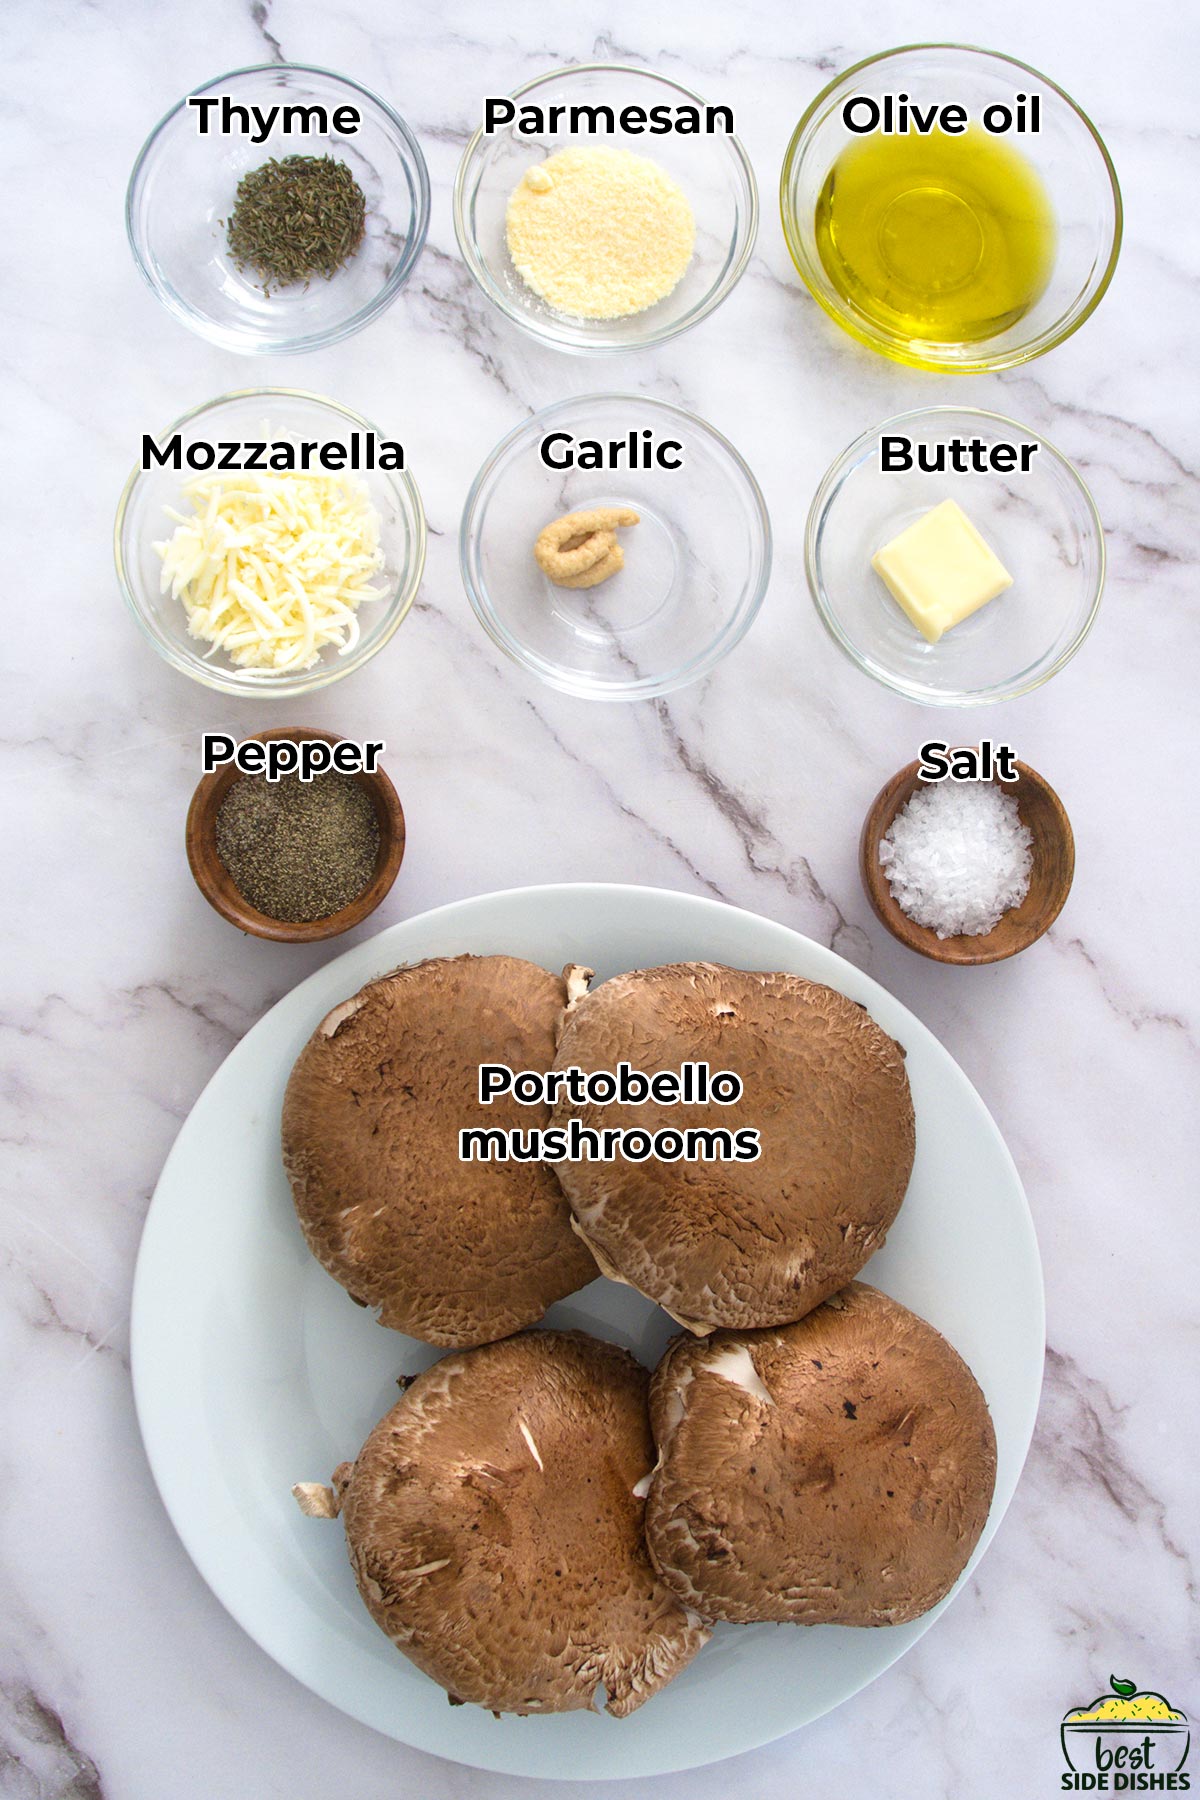 ingredients for stuffed mushrooms in separate bowls with labels